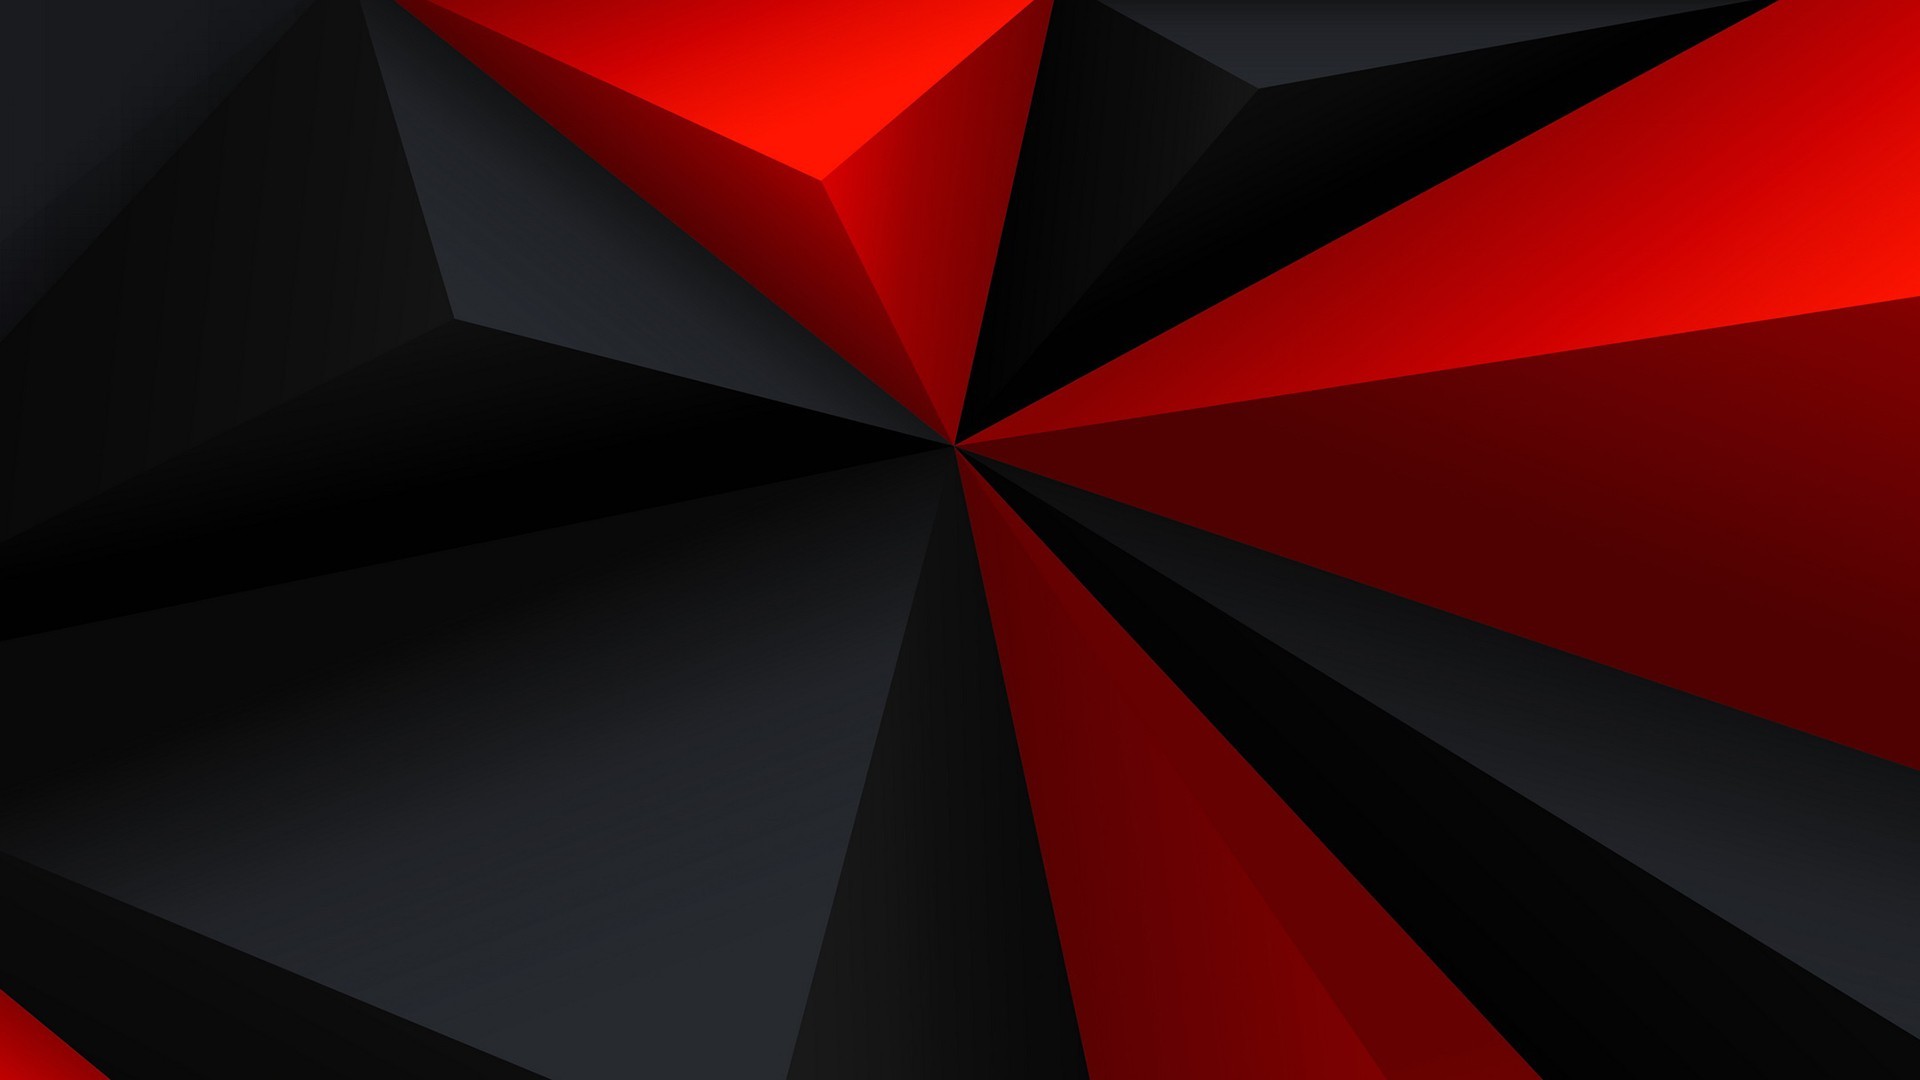 Red and Black Abstract Backgrounds (62+ pictures)